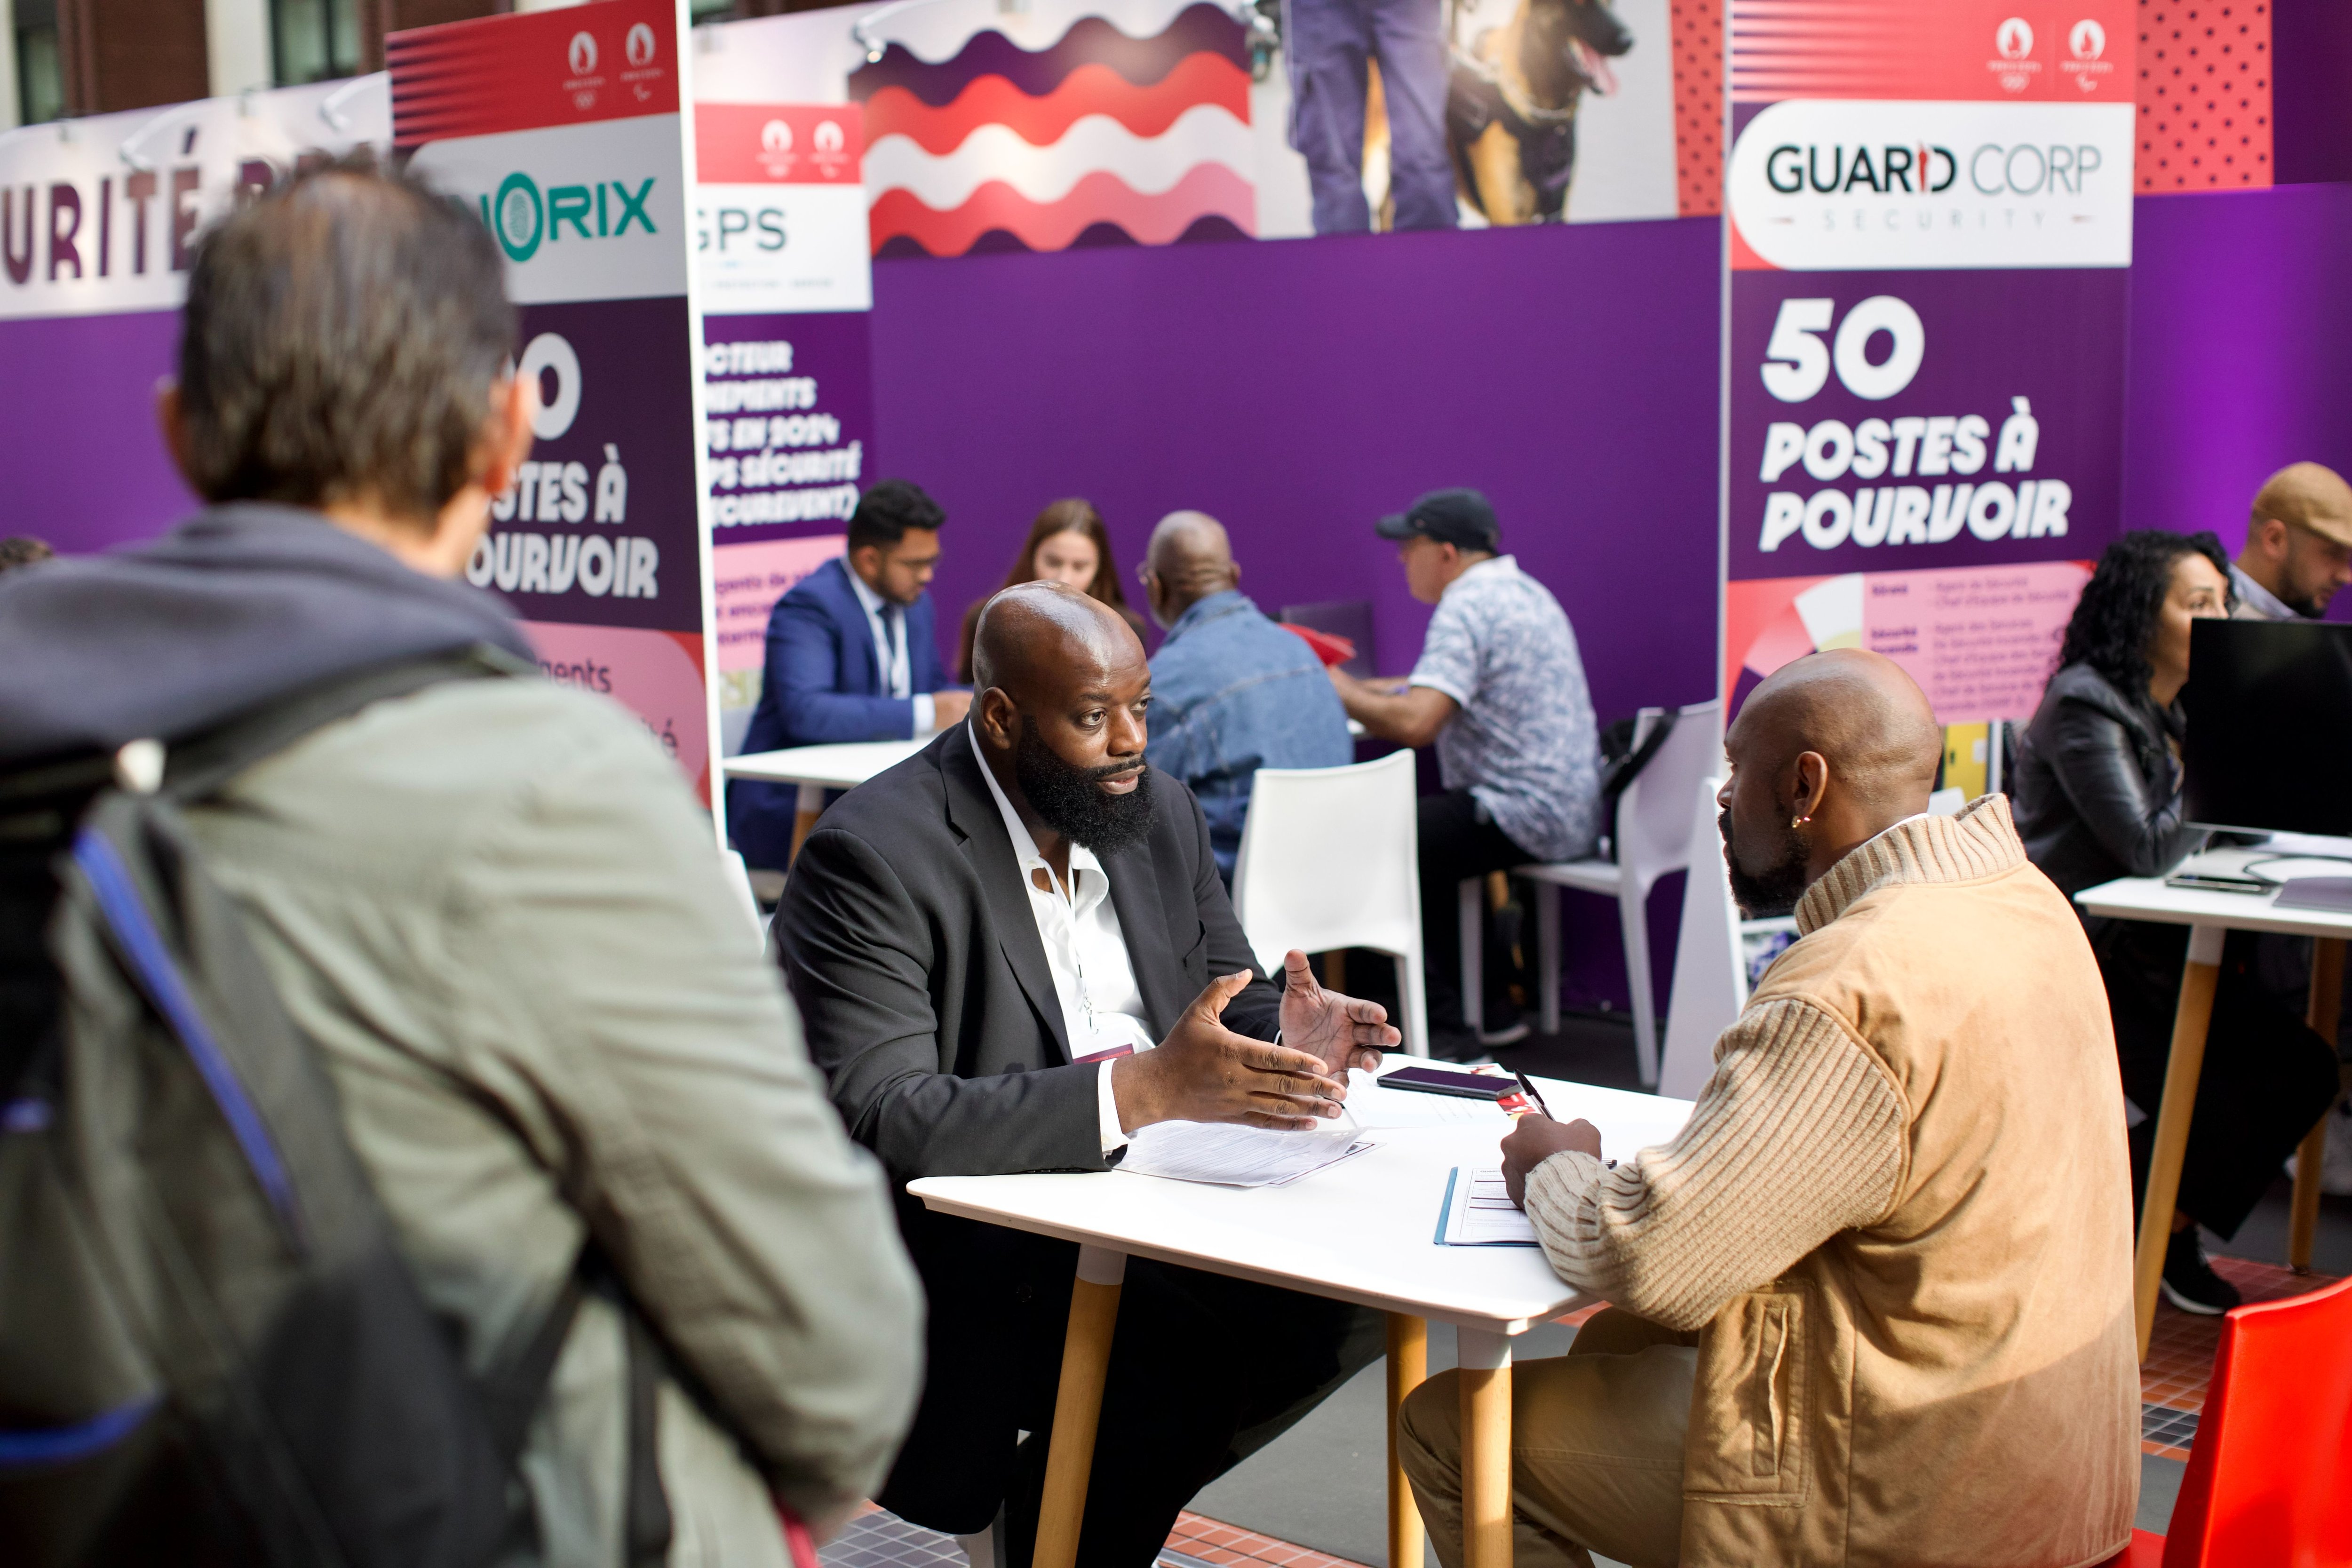 Job forums dedicated to the Games, like here at the Cité du Cinéma in Saint-Denis (Seine-Saint-Denis), on September 26, 2023, allow recruiters to meet candidates.  Credits: Paris 2024/Emeric Fohlen